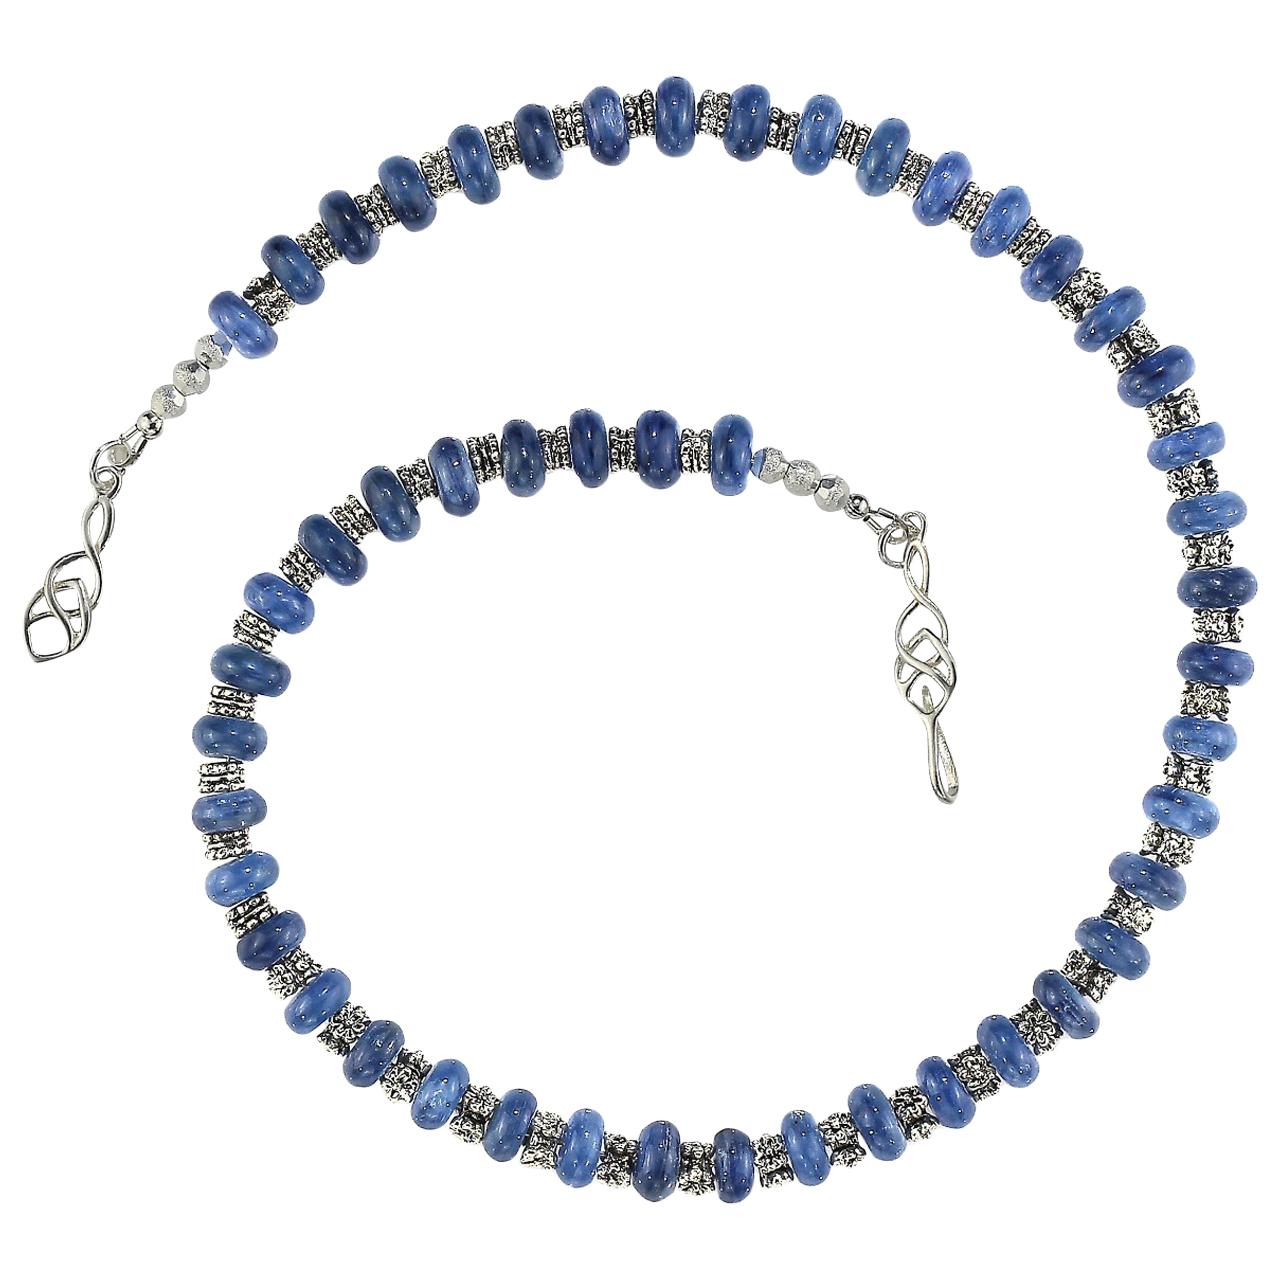 Artisan  AJD Gorgeous Necklace of Blue Kyanite Alternating with Silver Bali